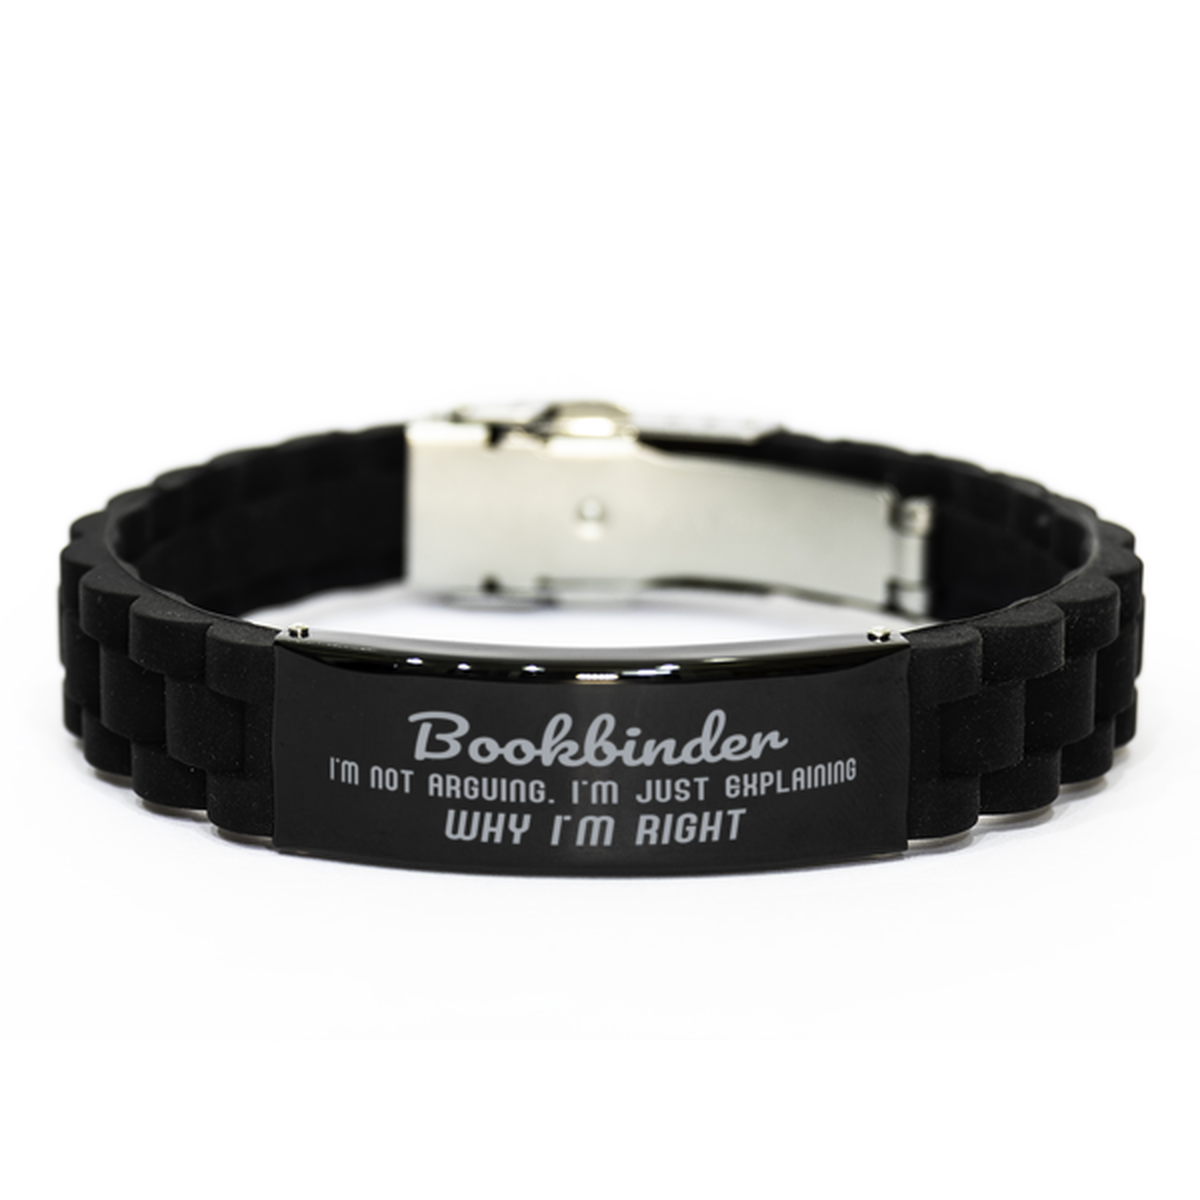 Bookbinder I'm not Arguing. I'm Just Explaining Why I'm RIGHT Black Glidelock Clasp Bracelet, Funny Saying Quote Bookbinder Gifts For Bookbinder Graduation Birthday Christmas Gifts for Men Women Coworker